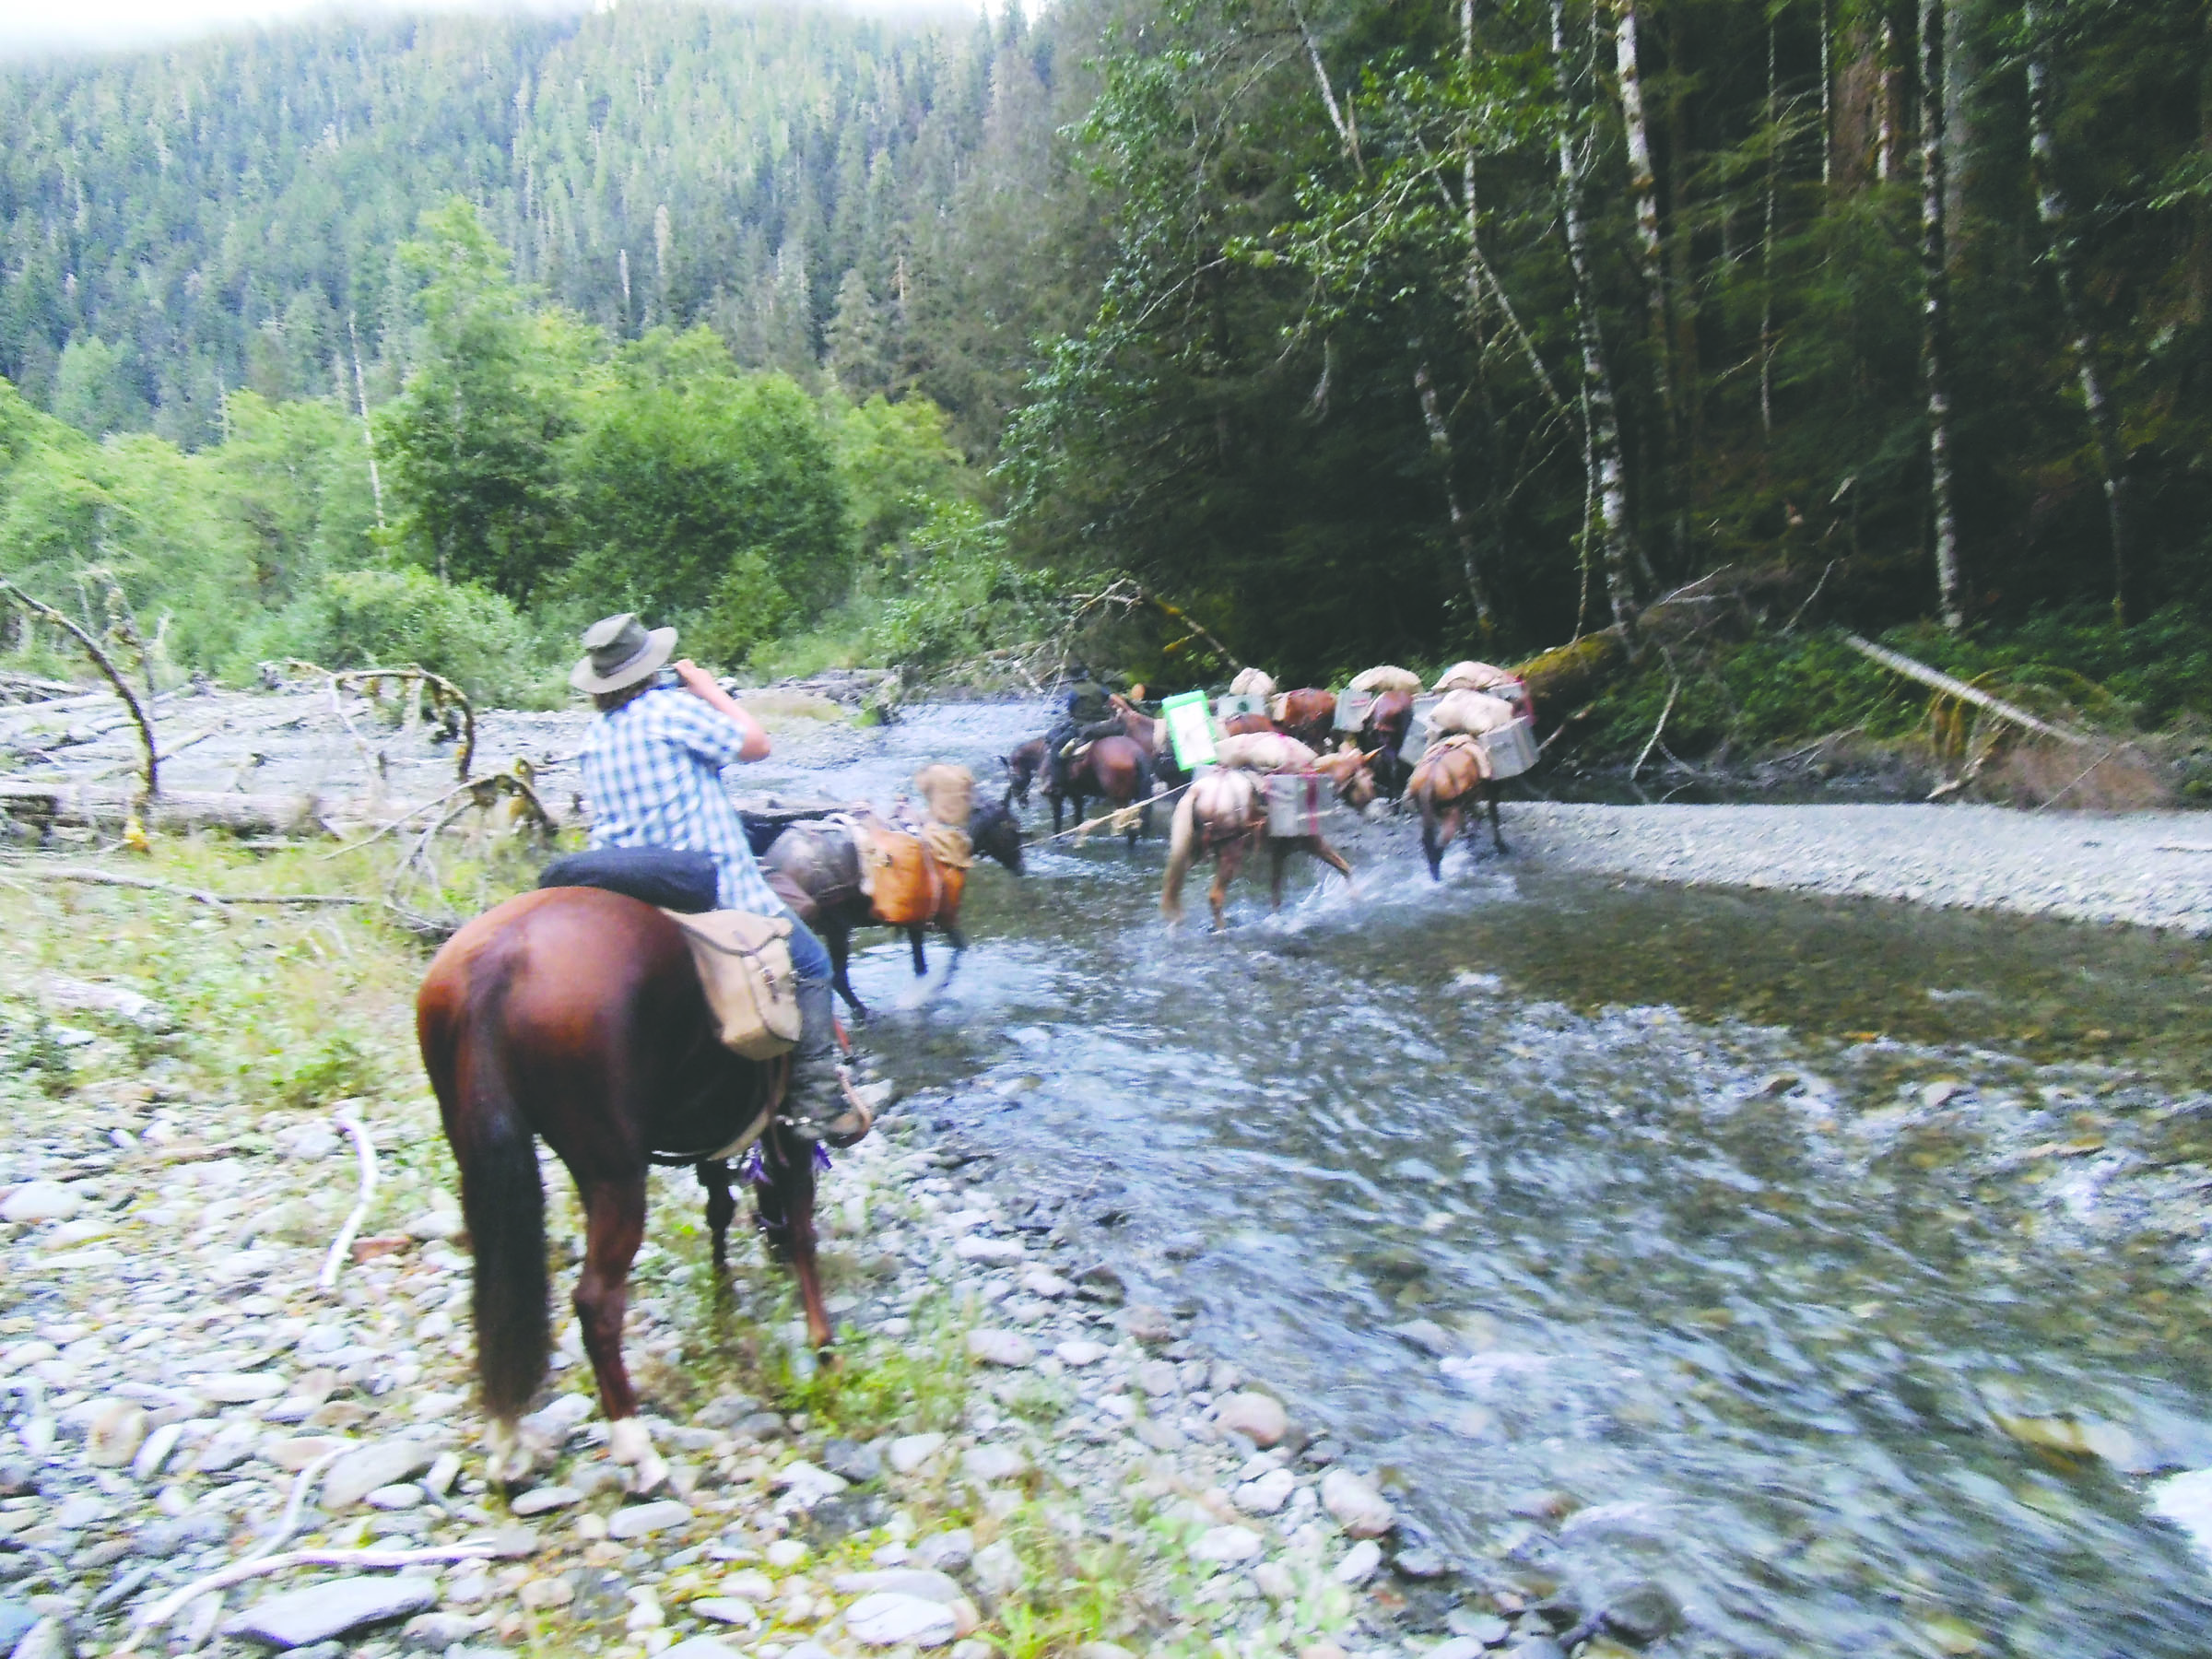 Sara Woodard follows a pack string of mules led by Sol Duc Valley Packers’ Larry Baysinger across the Quinault River. The Baysingers were selected to pack tools